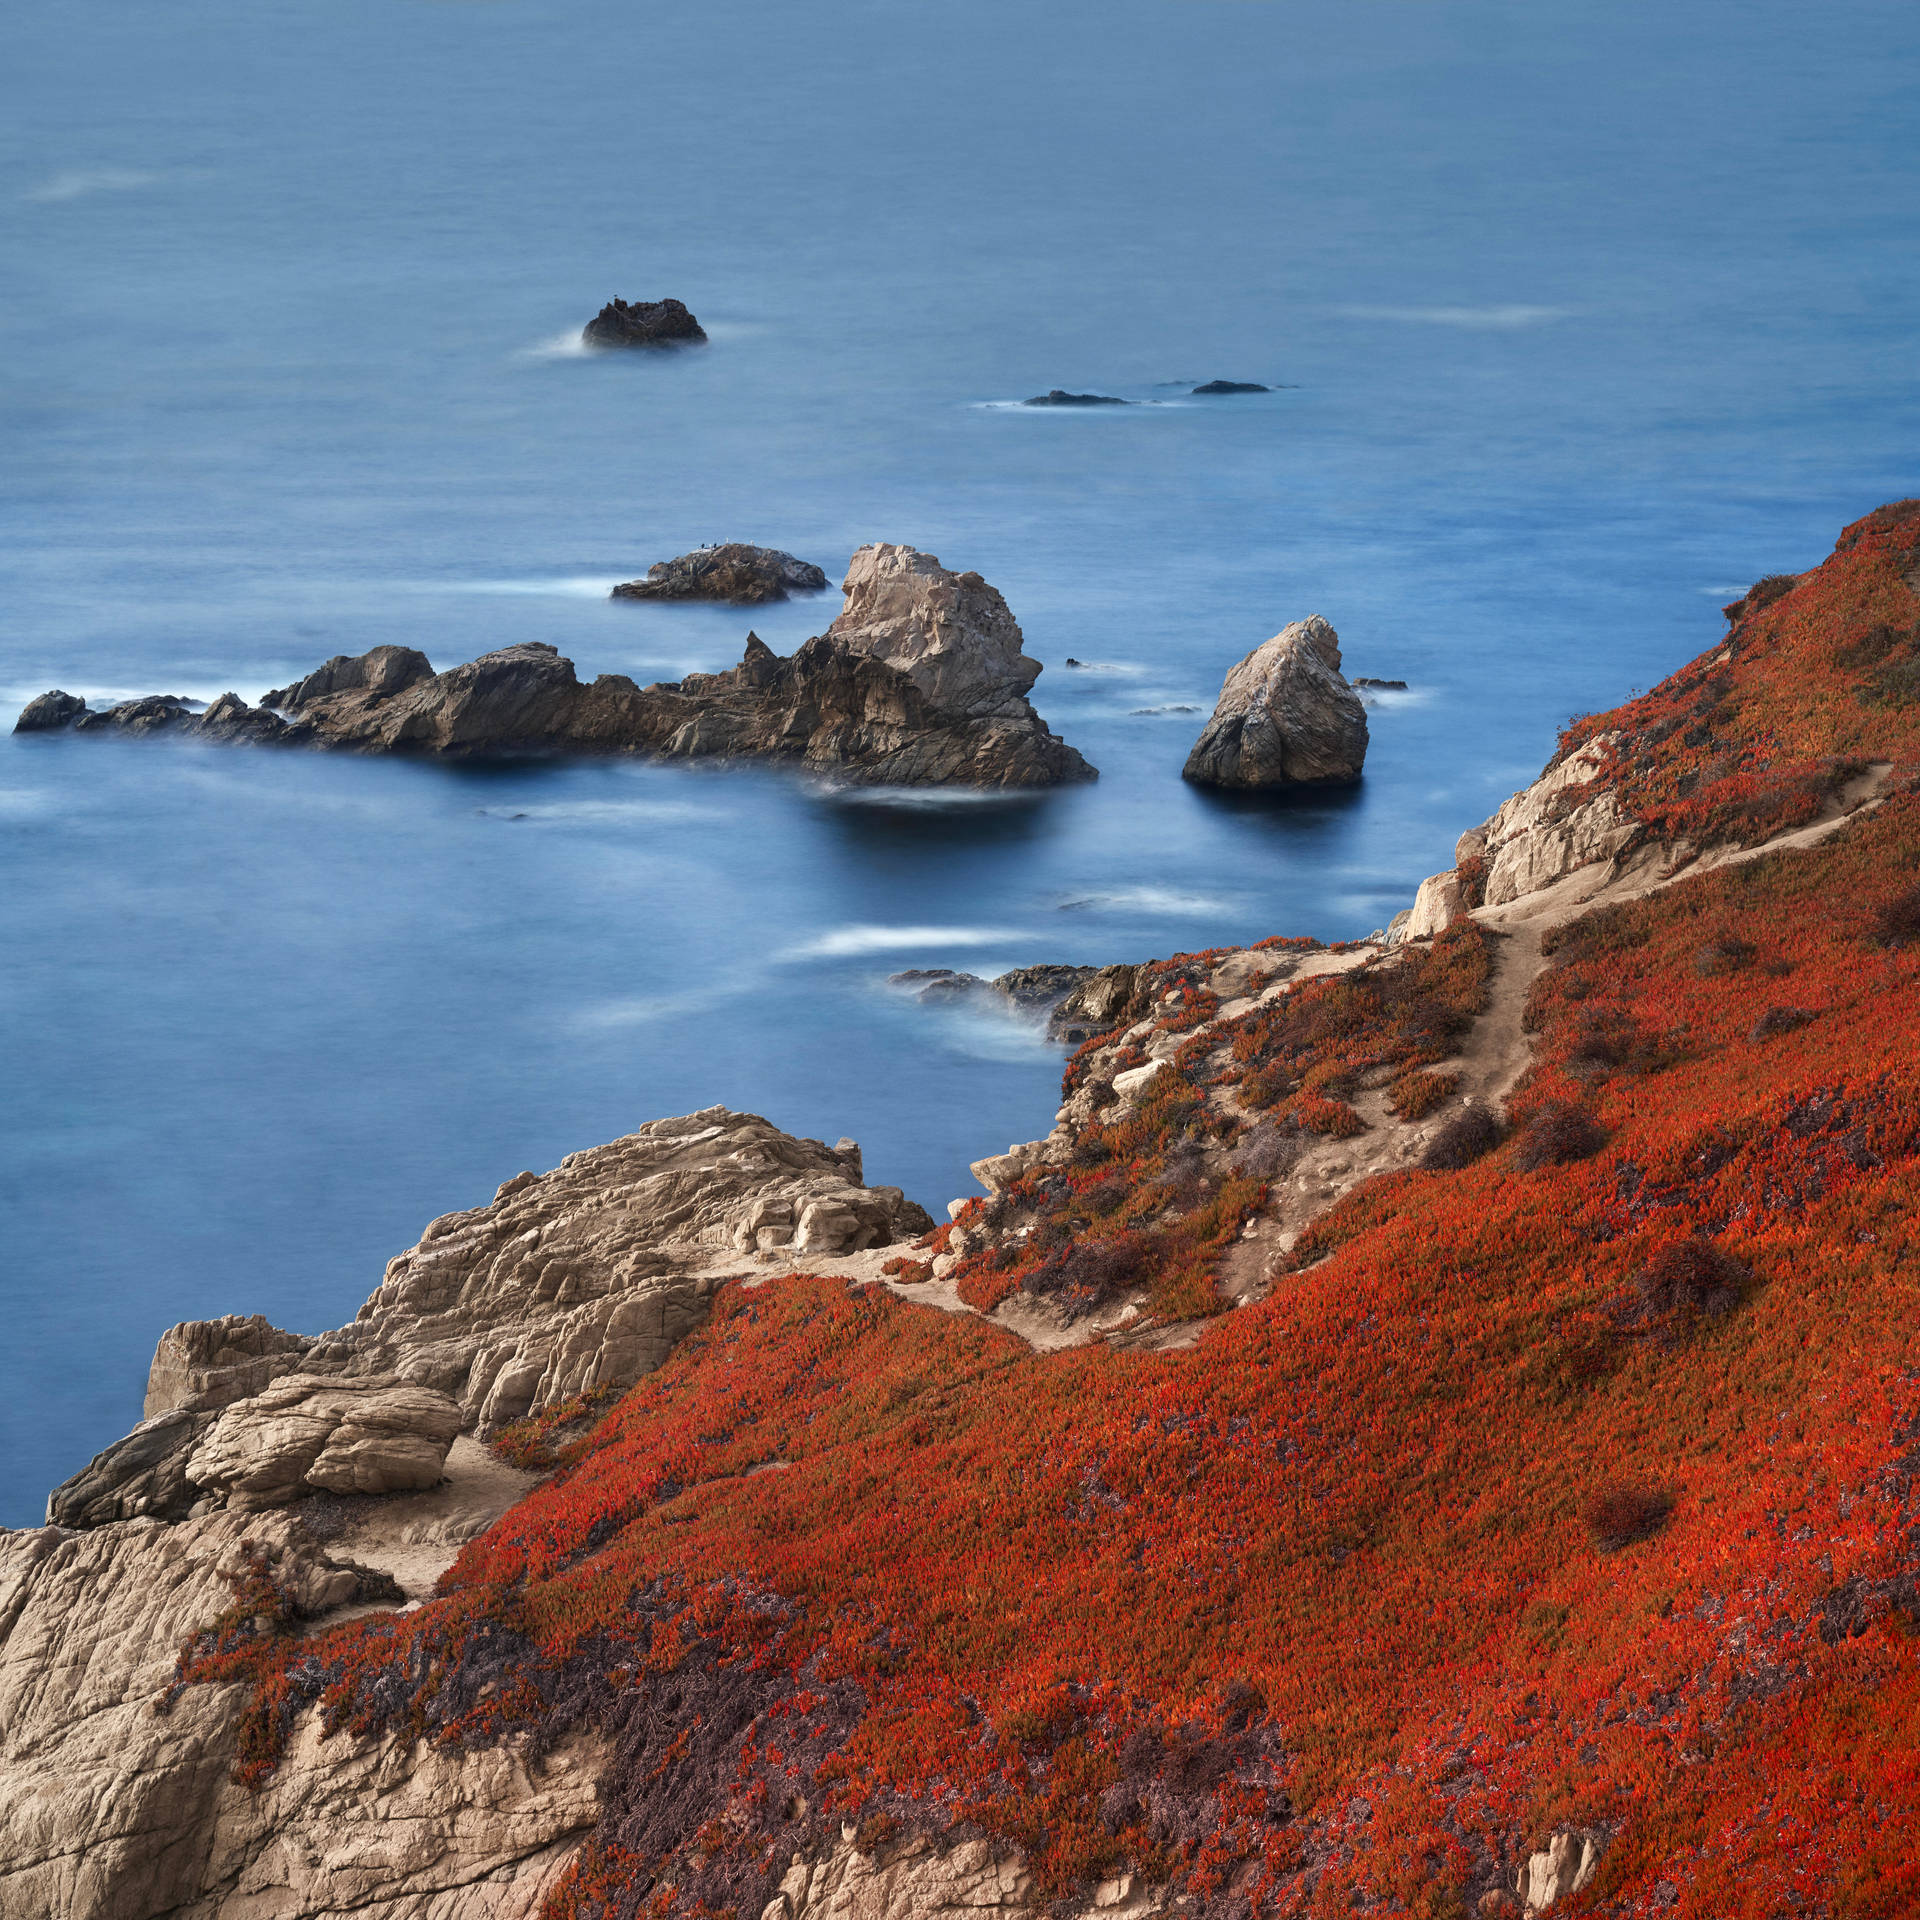 Macos Big Sur 6016X6016 Wallpaper and Background Image